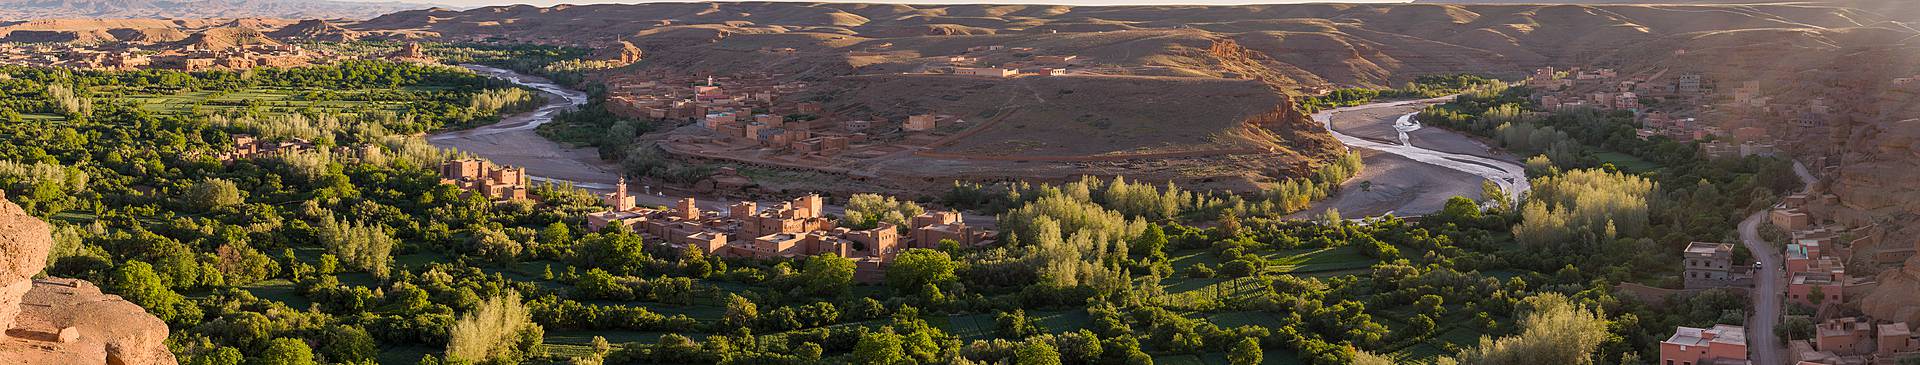 Morocco in August